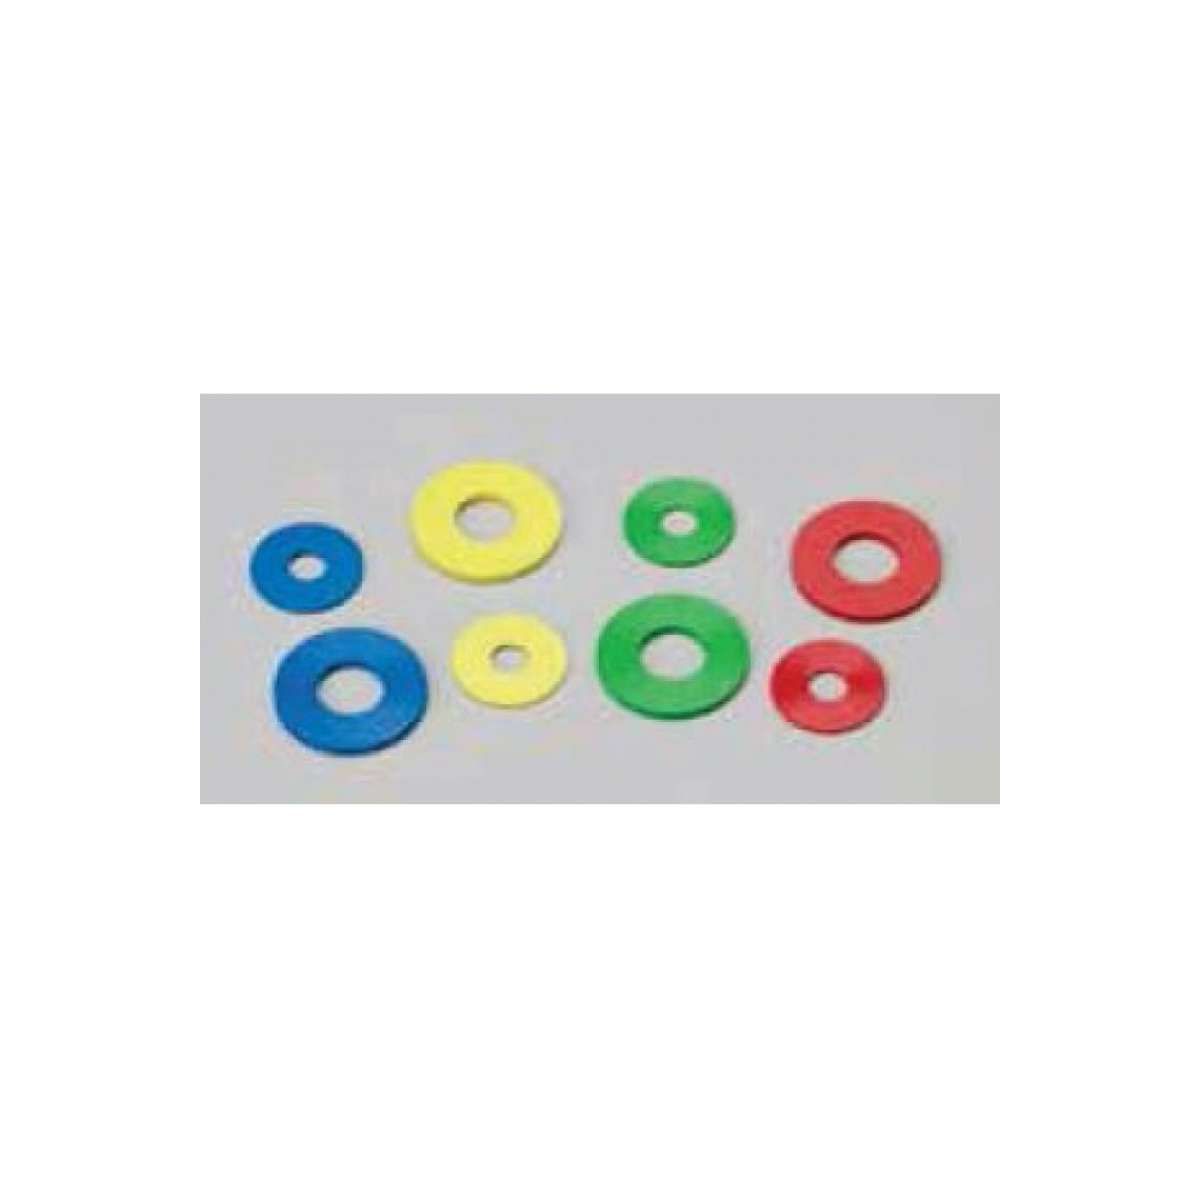 Grease Fitting Washer - 1/8 NPT - Yellow